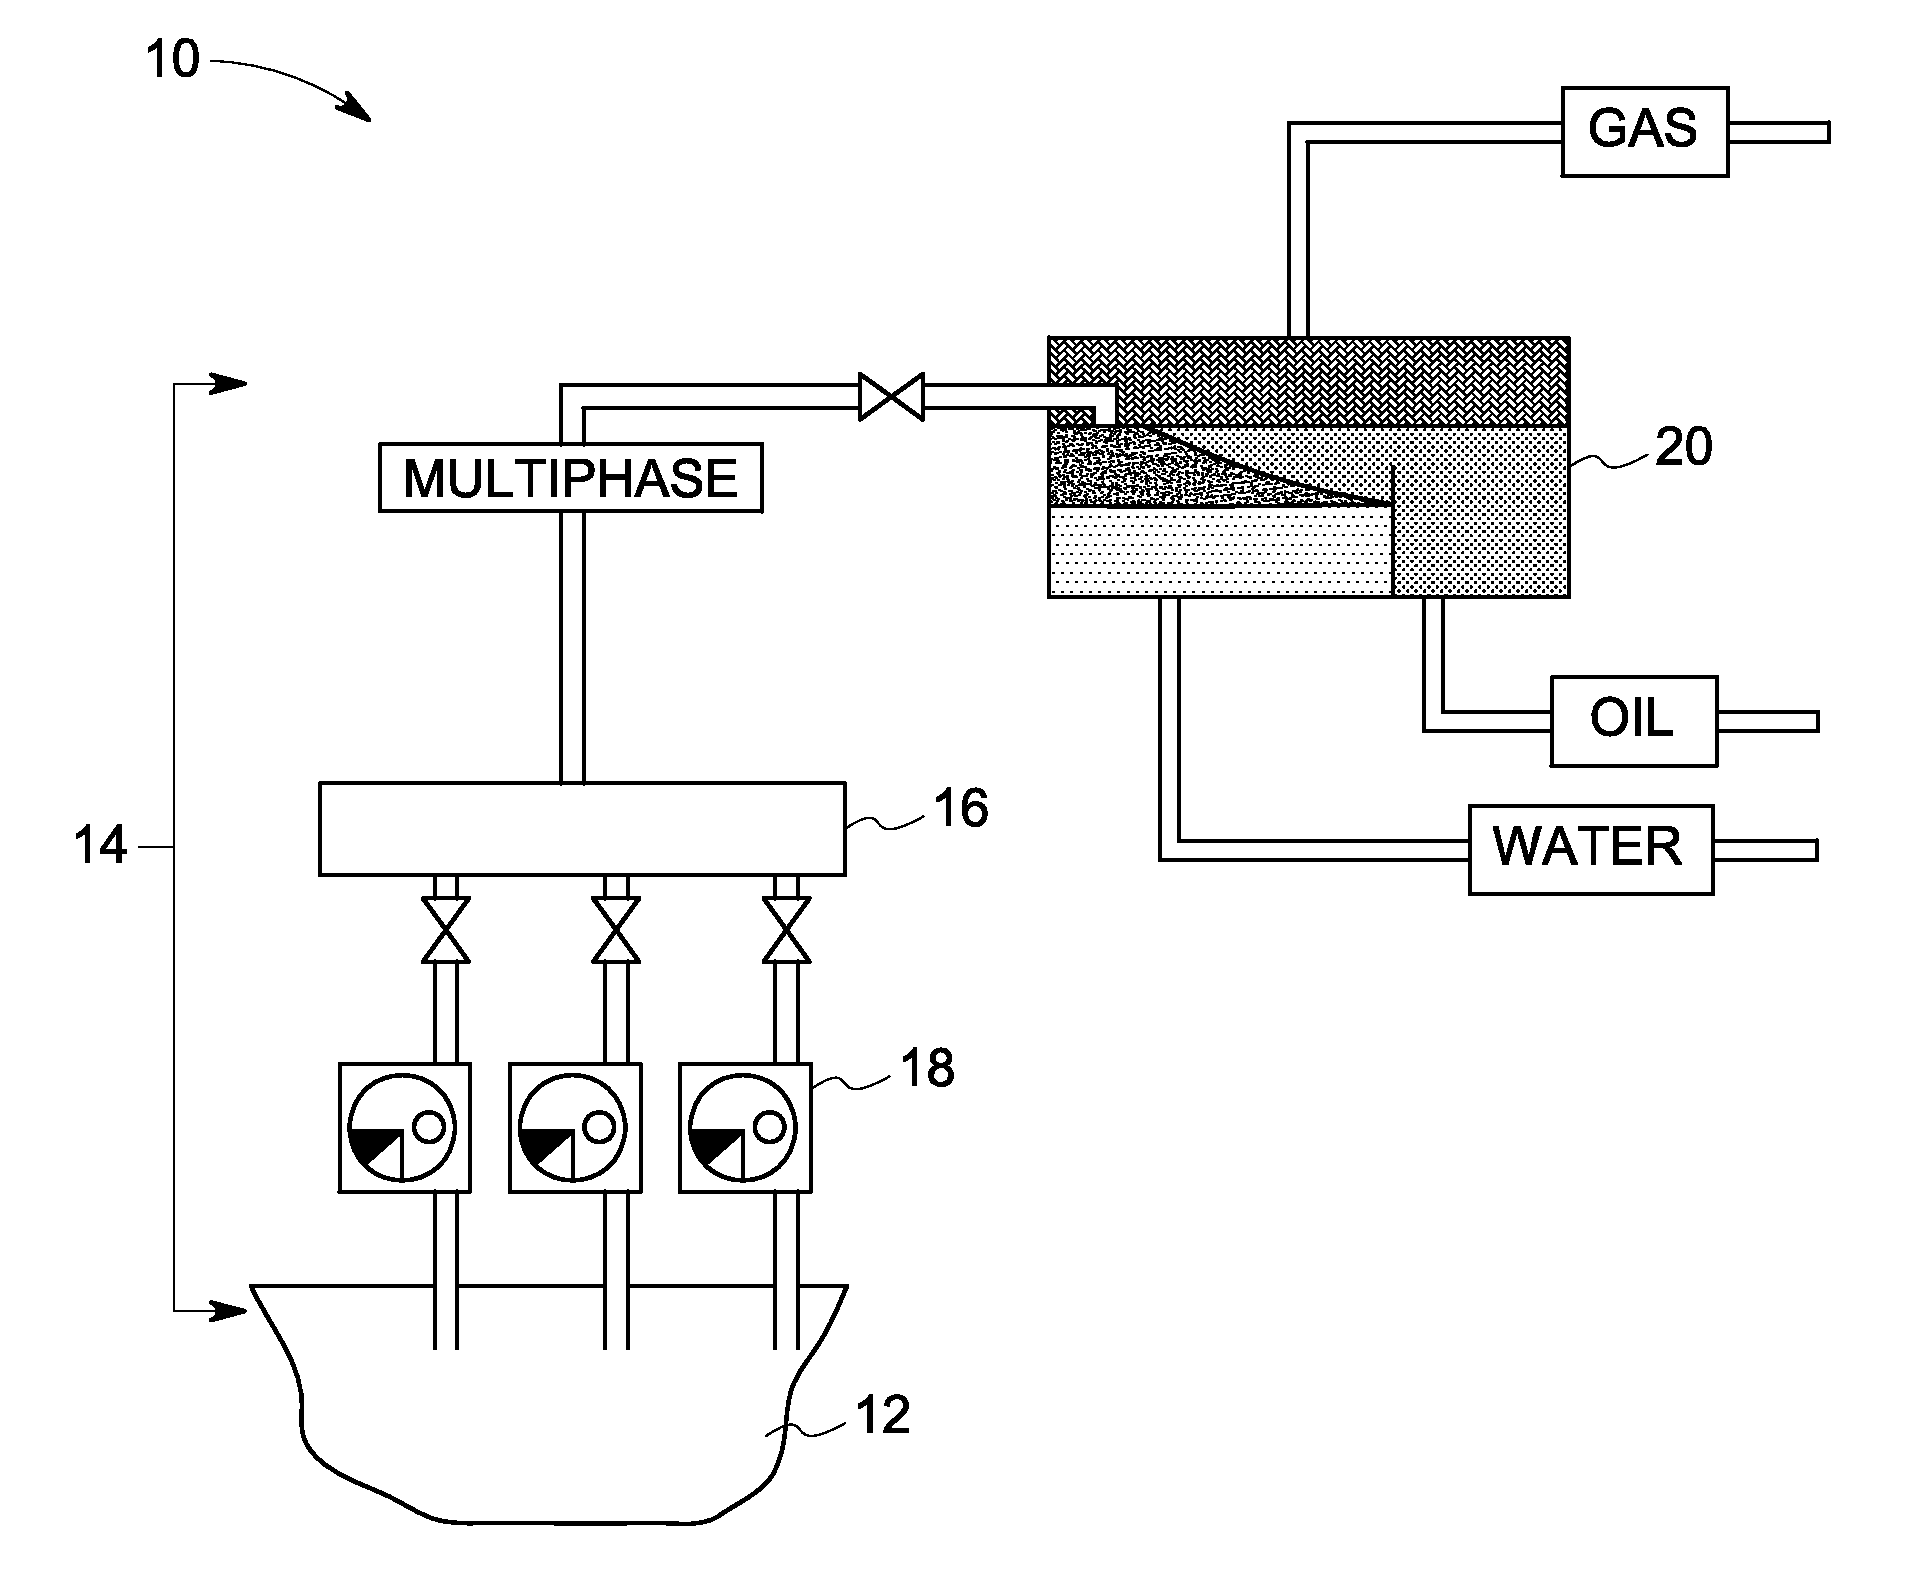 Electrical network representation of a distributed system